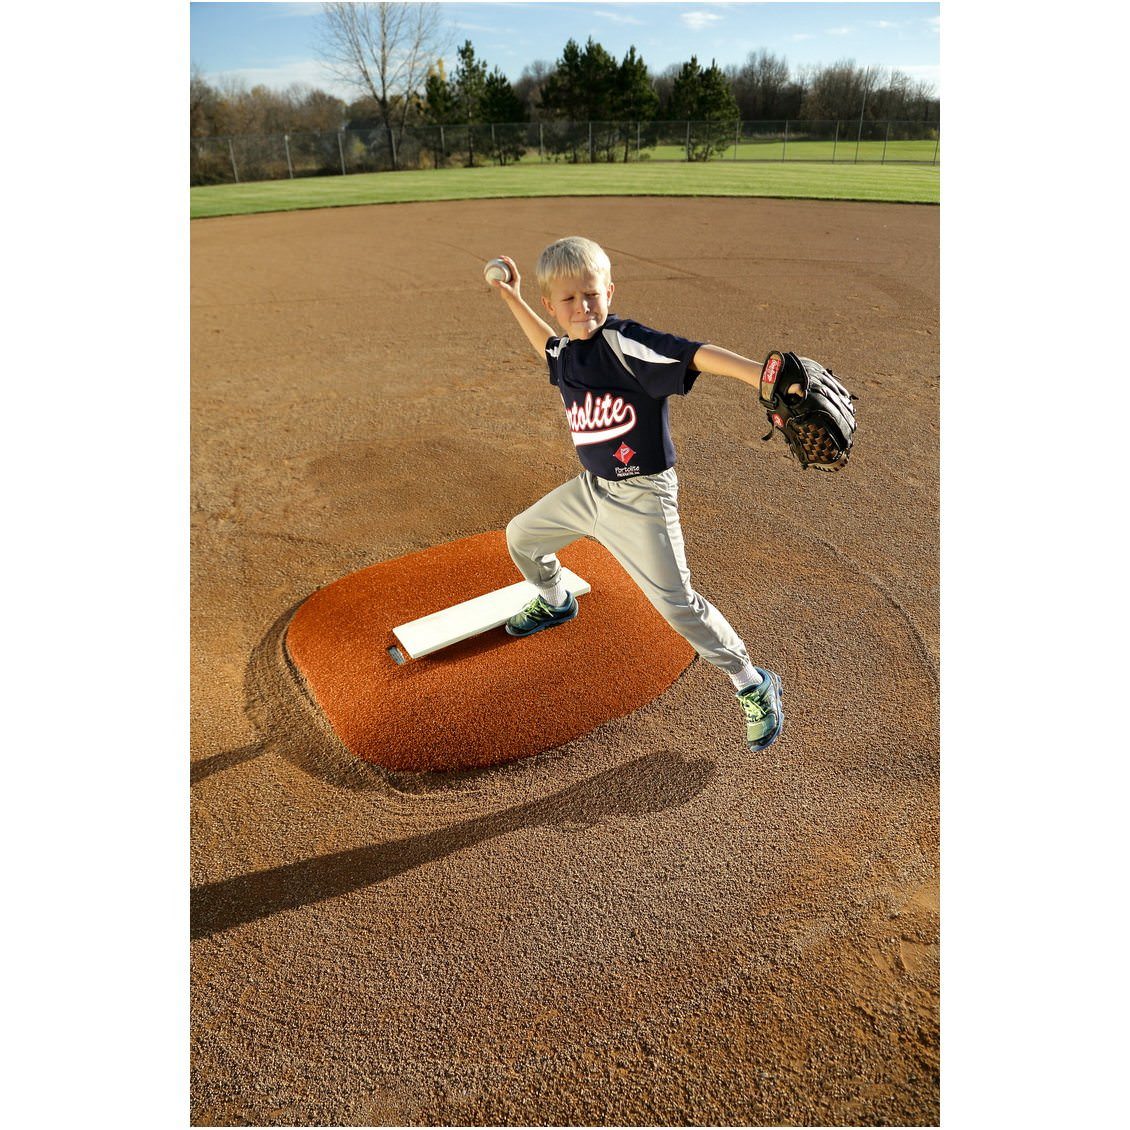 PortoLite 4" Youth Portable Baseball Pitching Mound clay turf kid pitching front view